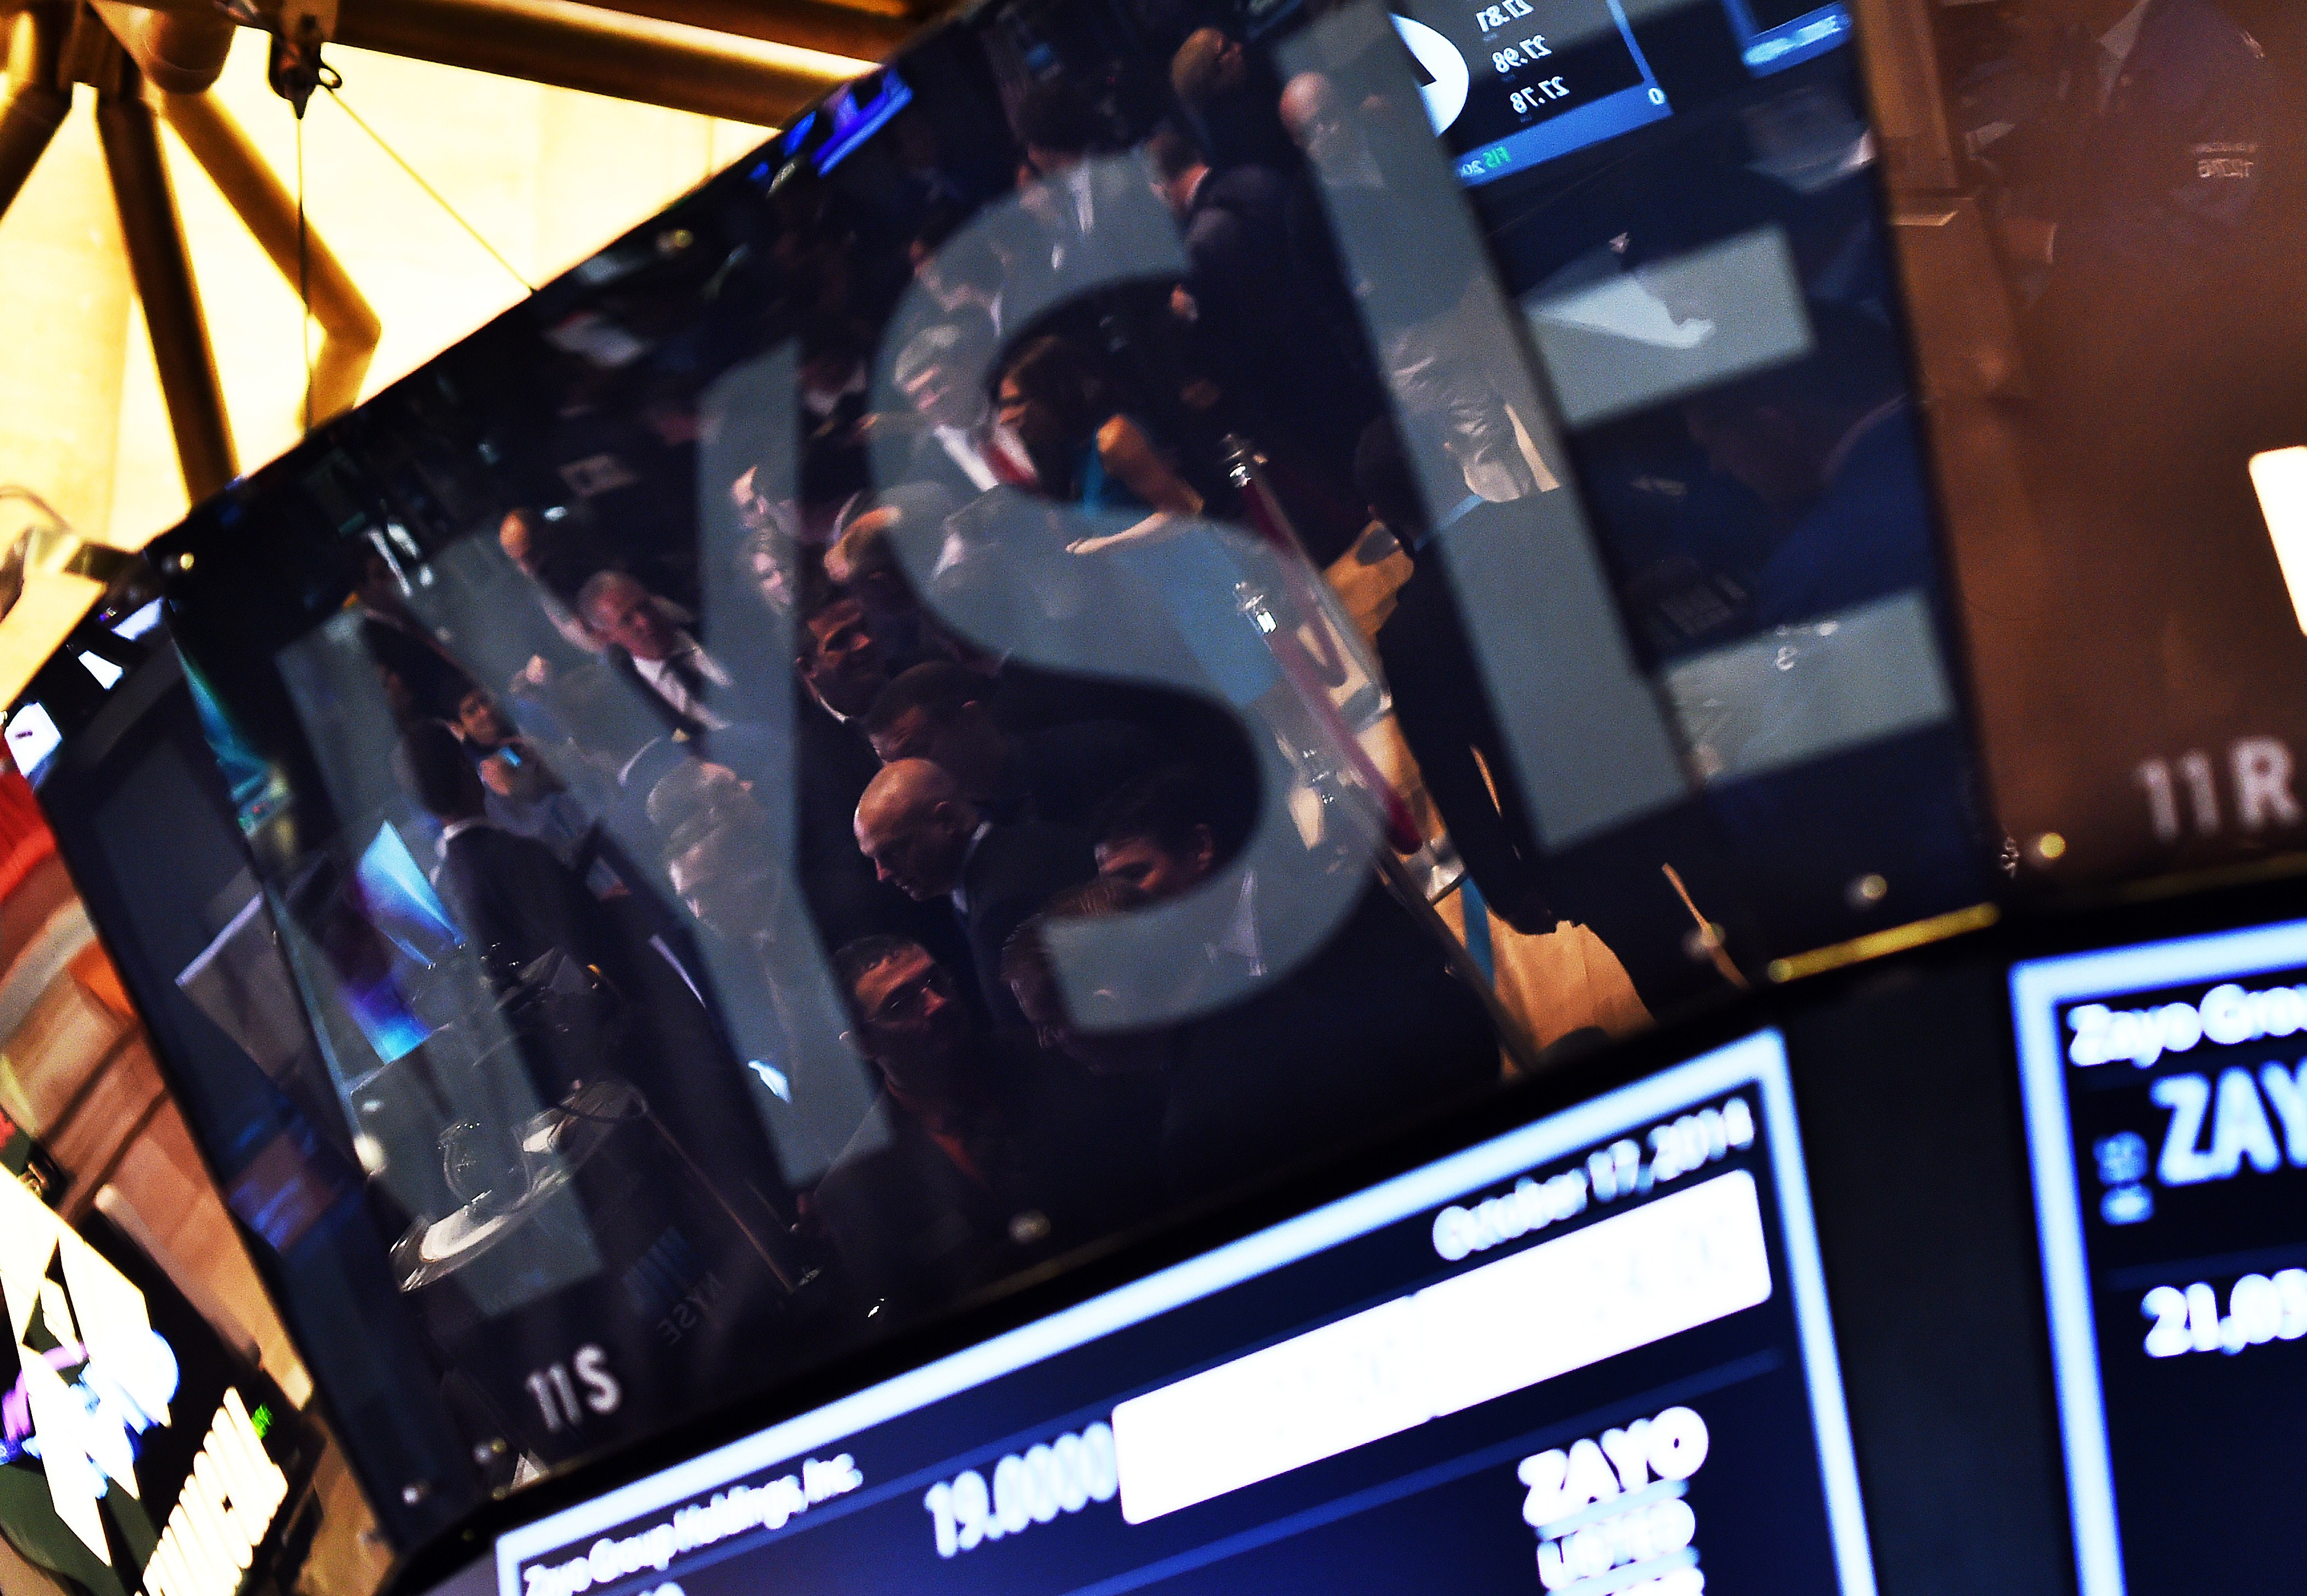 Traders are seen reflected on an electronic display as they work on the floor of the New York Stock Exchange on October 17, 2014 in New York.